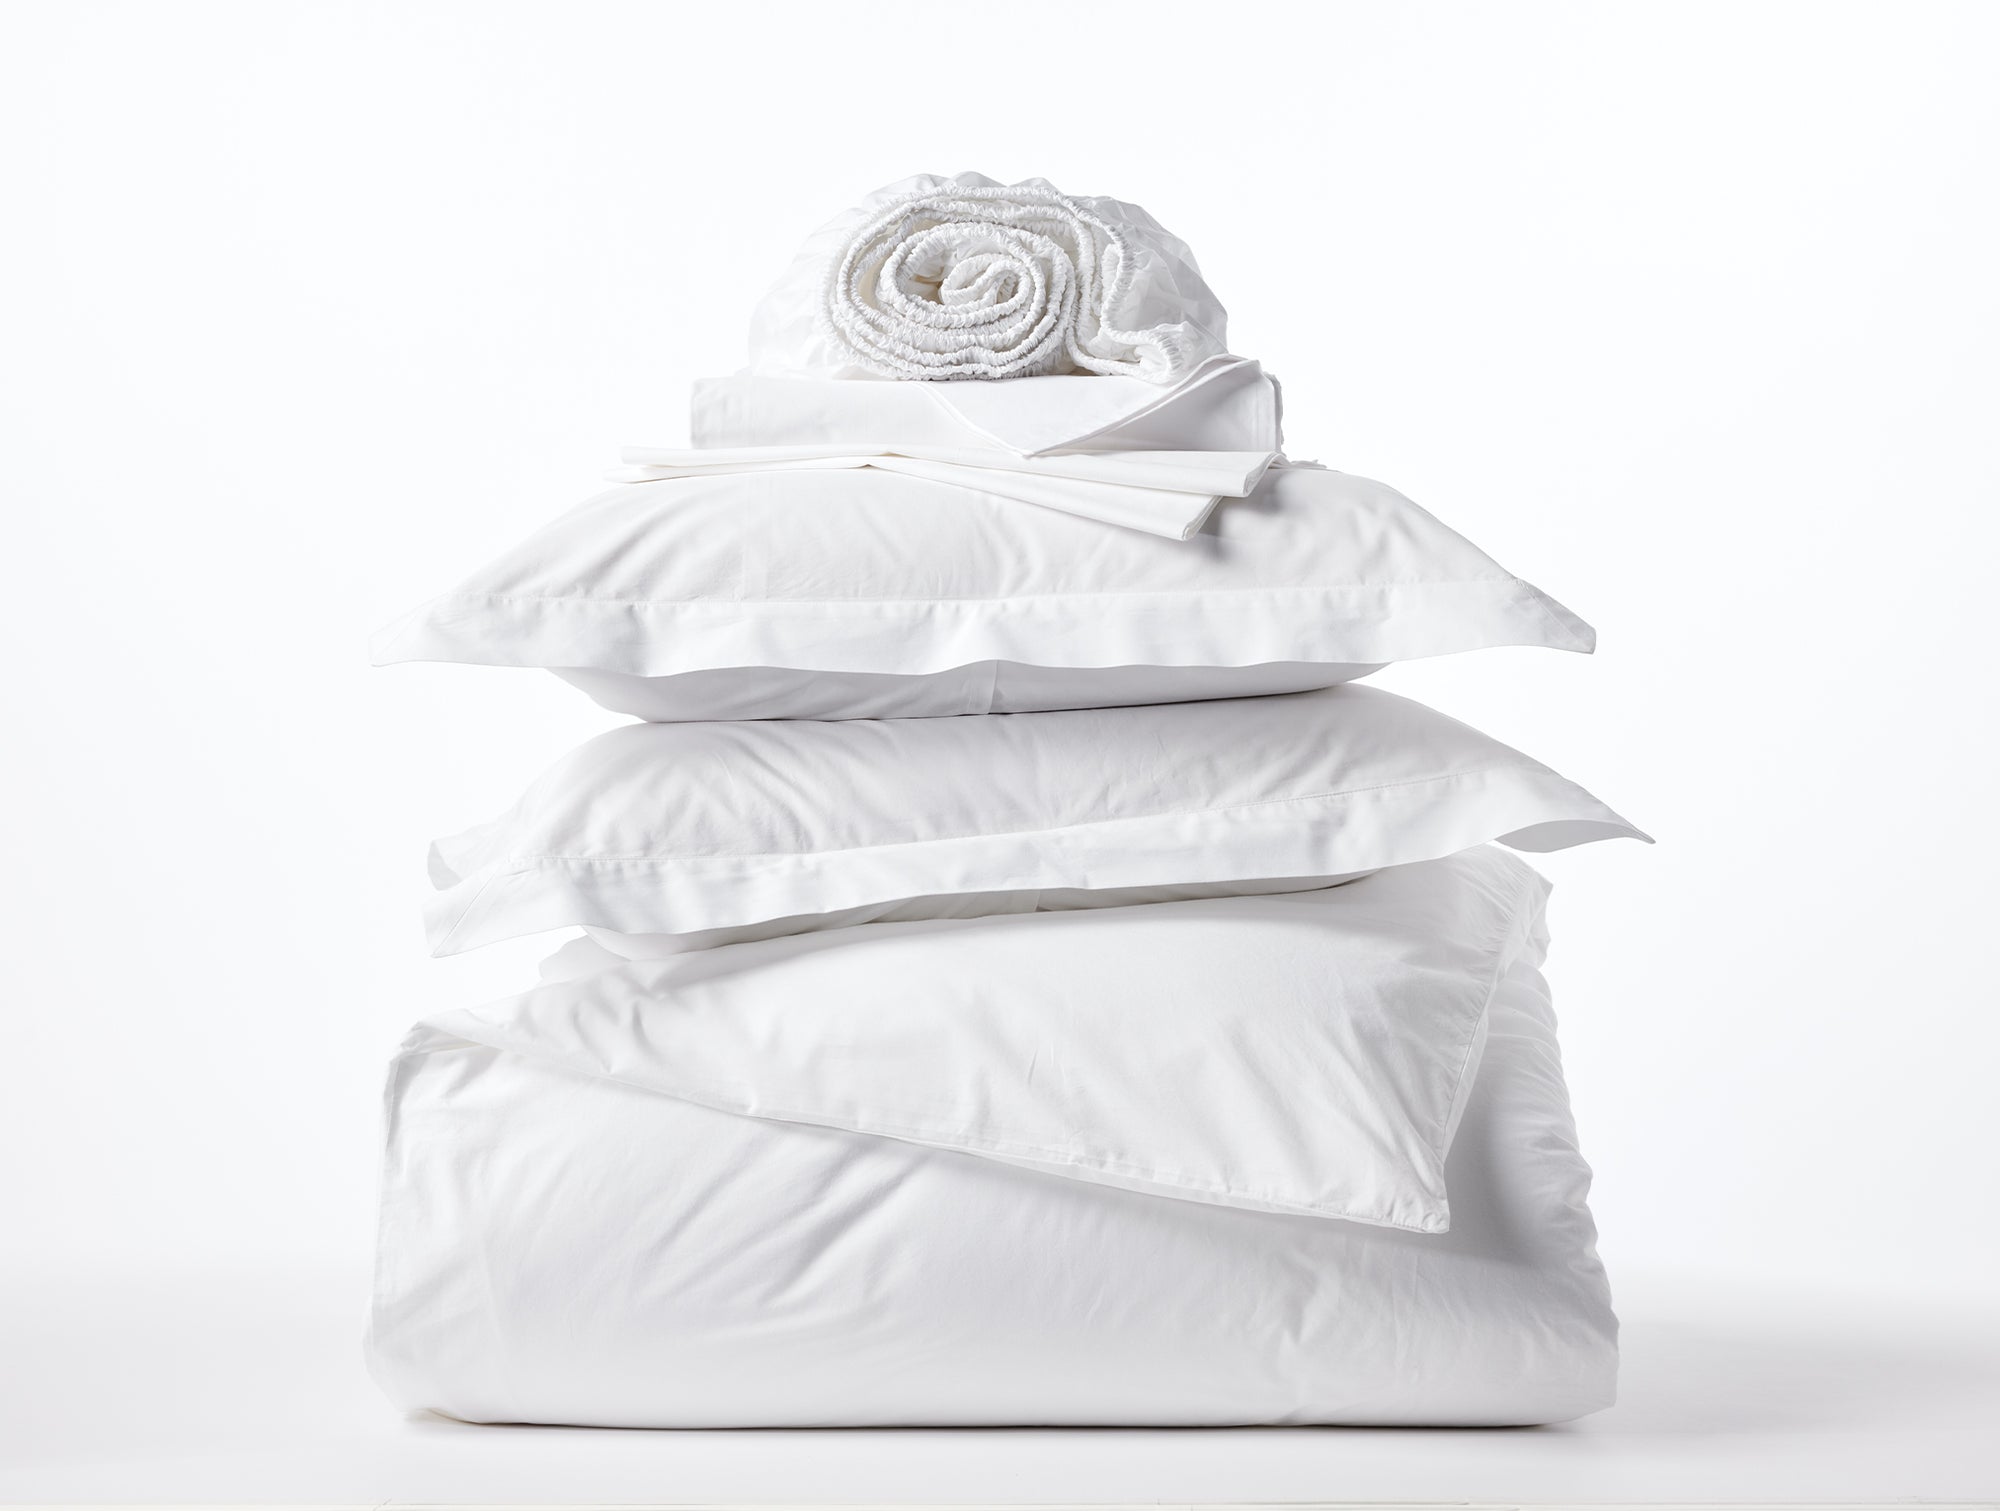 300 Thread Count Organic Percale Bedding Set in Queen